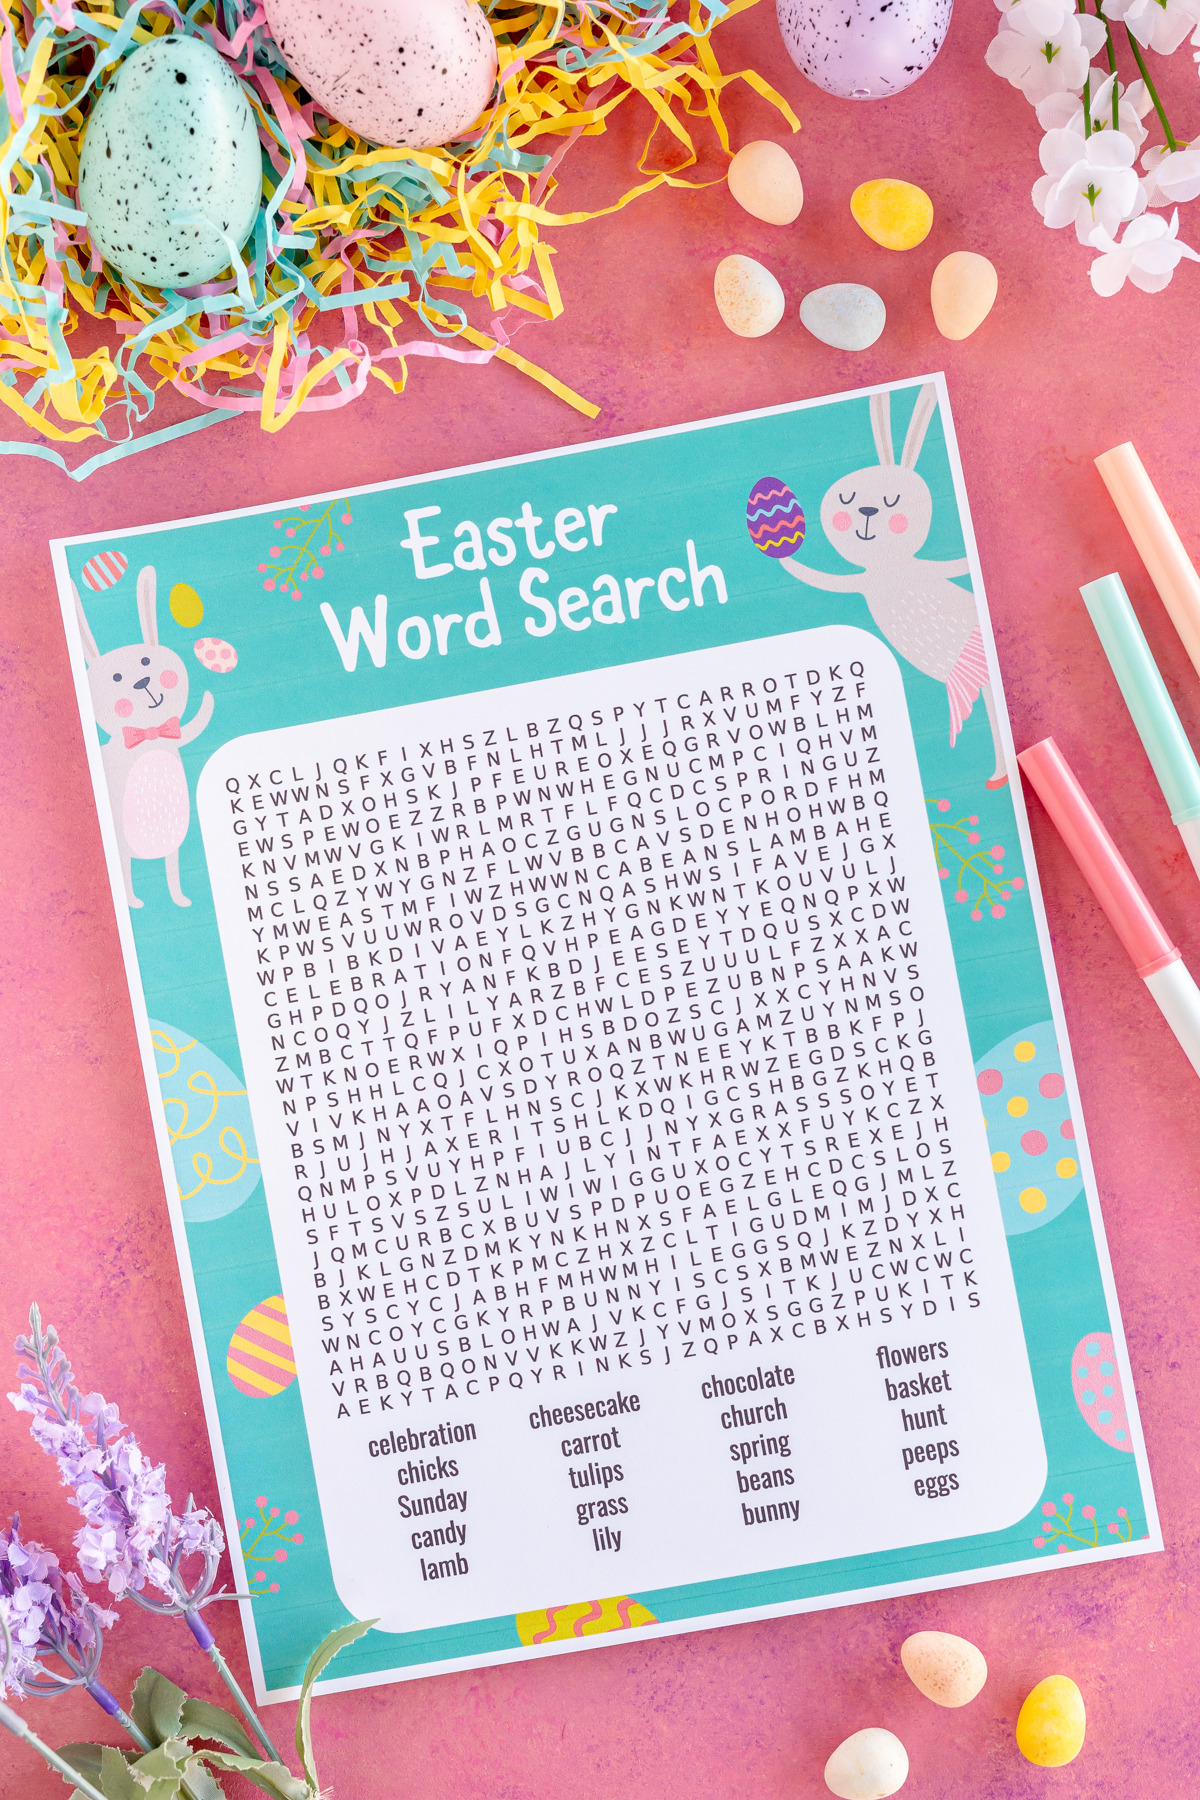 printed out Easter word search